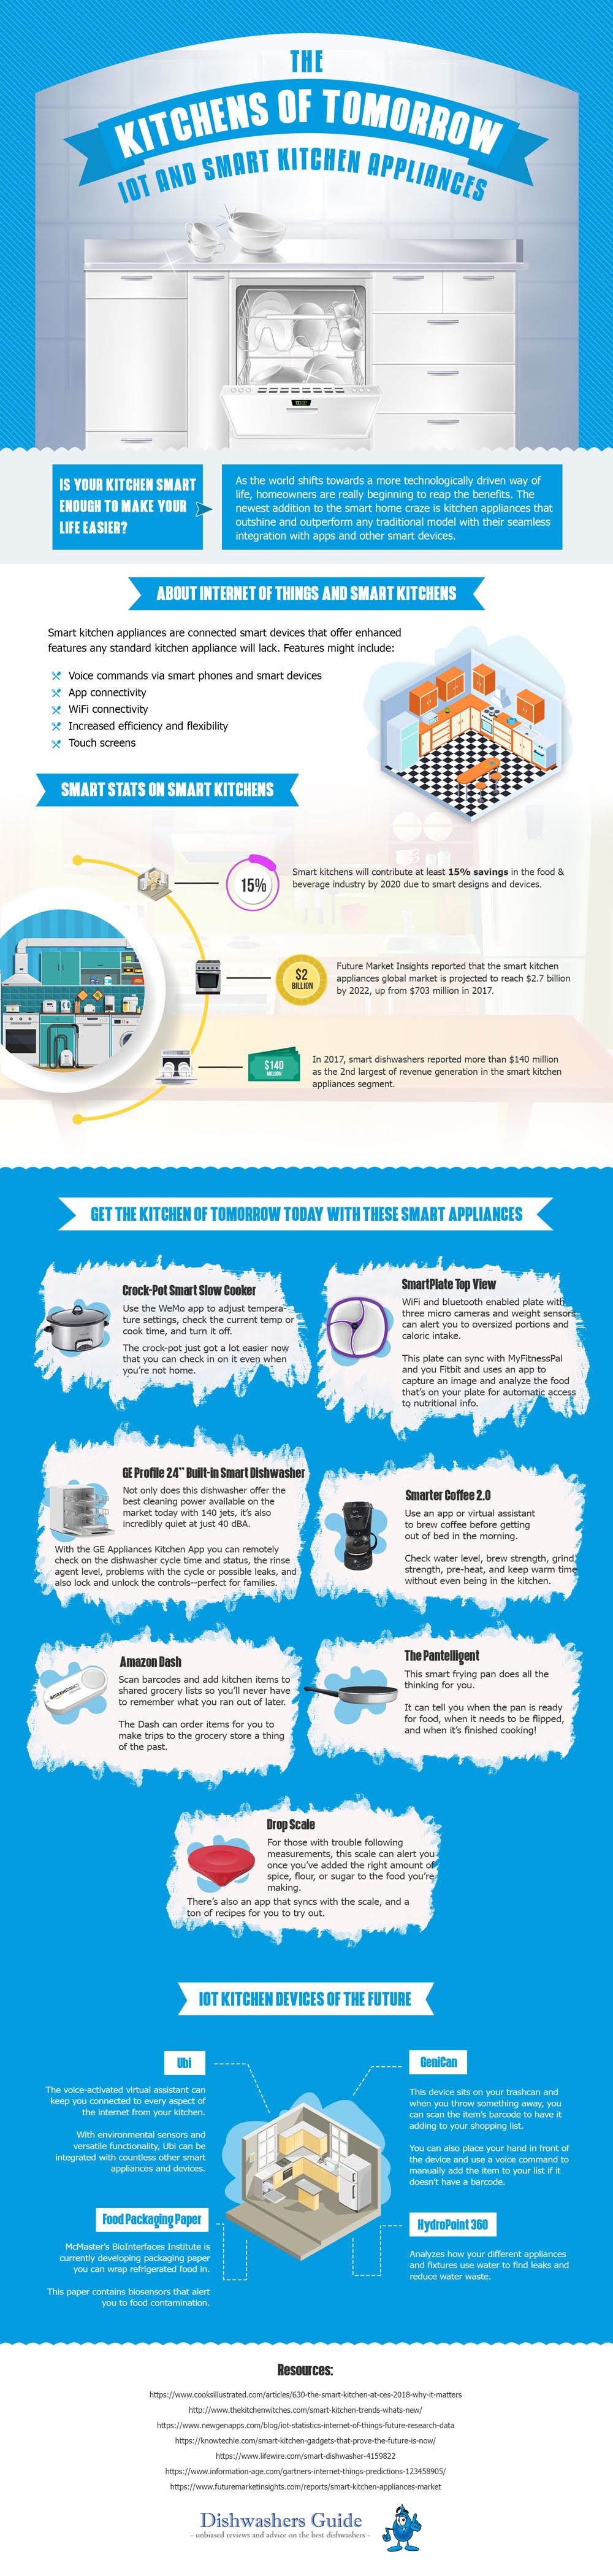 Future Kitchens of Tomorrow: IoT and Smart Kitchen Appliances #infographic